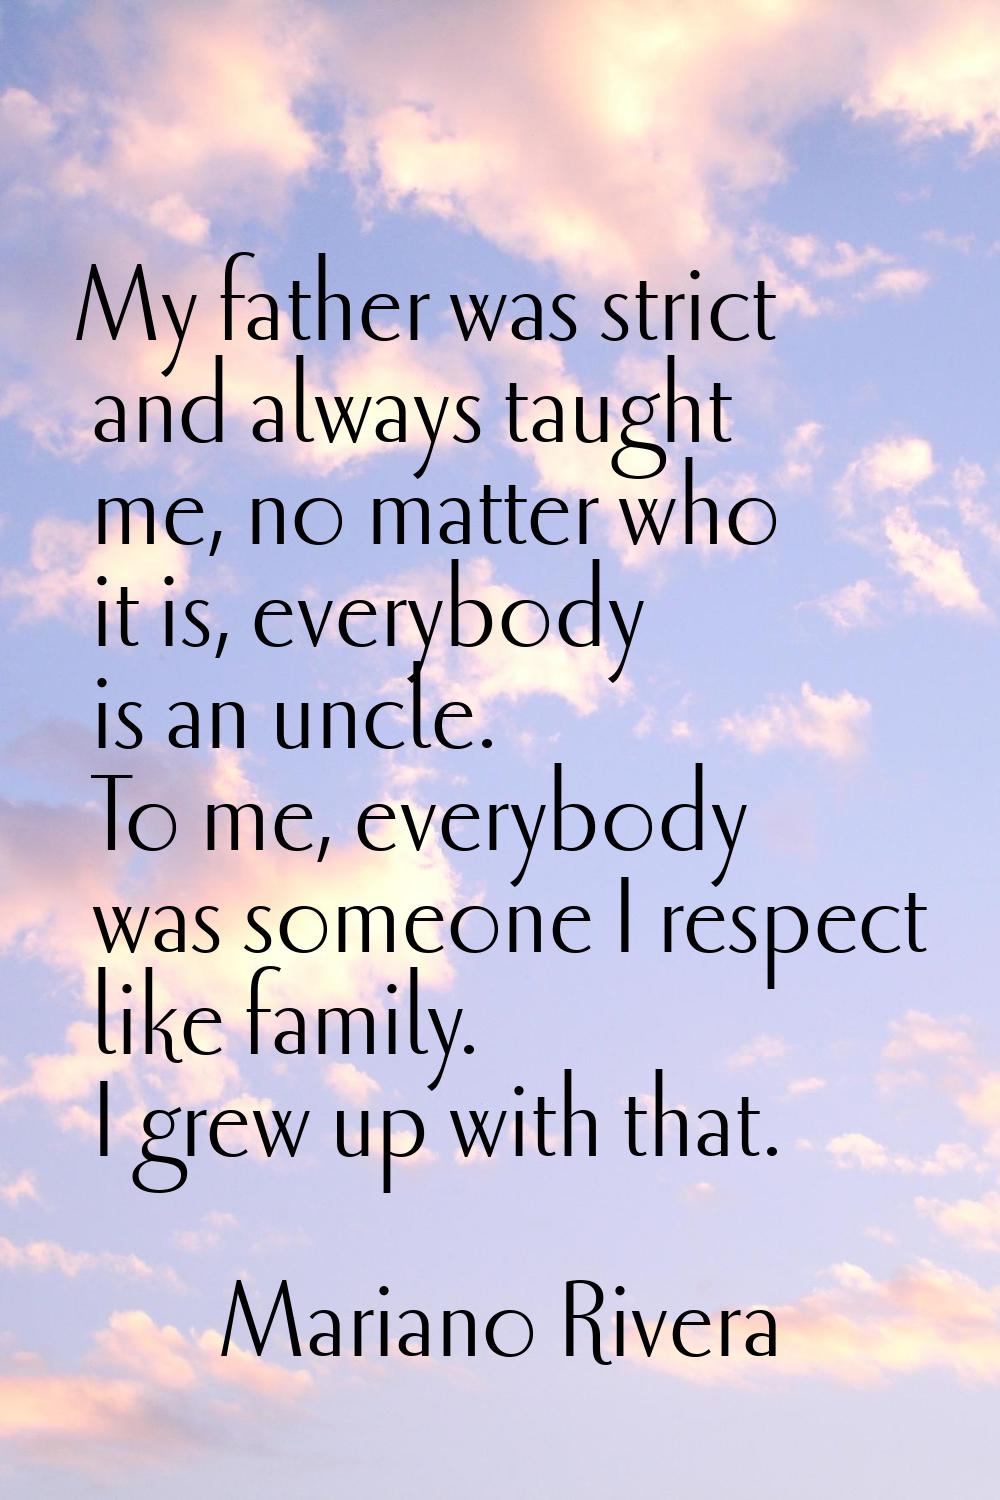 My father was strict and always taught me, no matter who it is, everybody is an uncle. To me, every